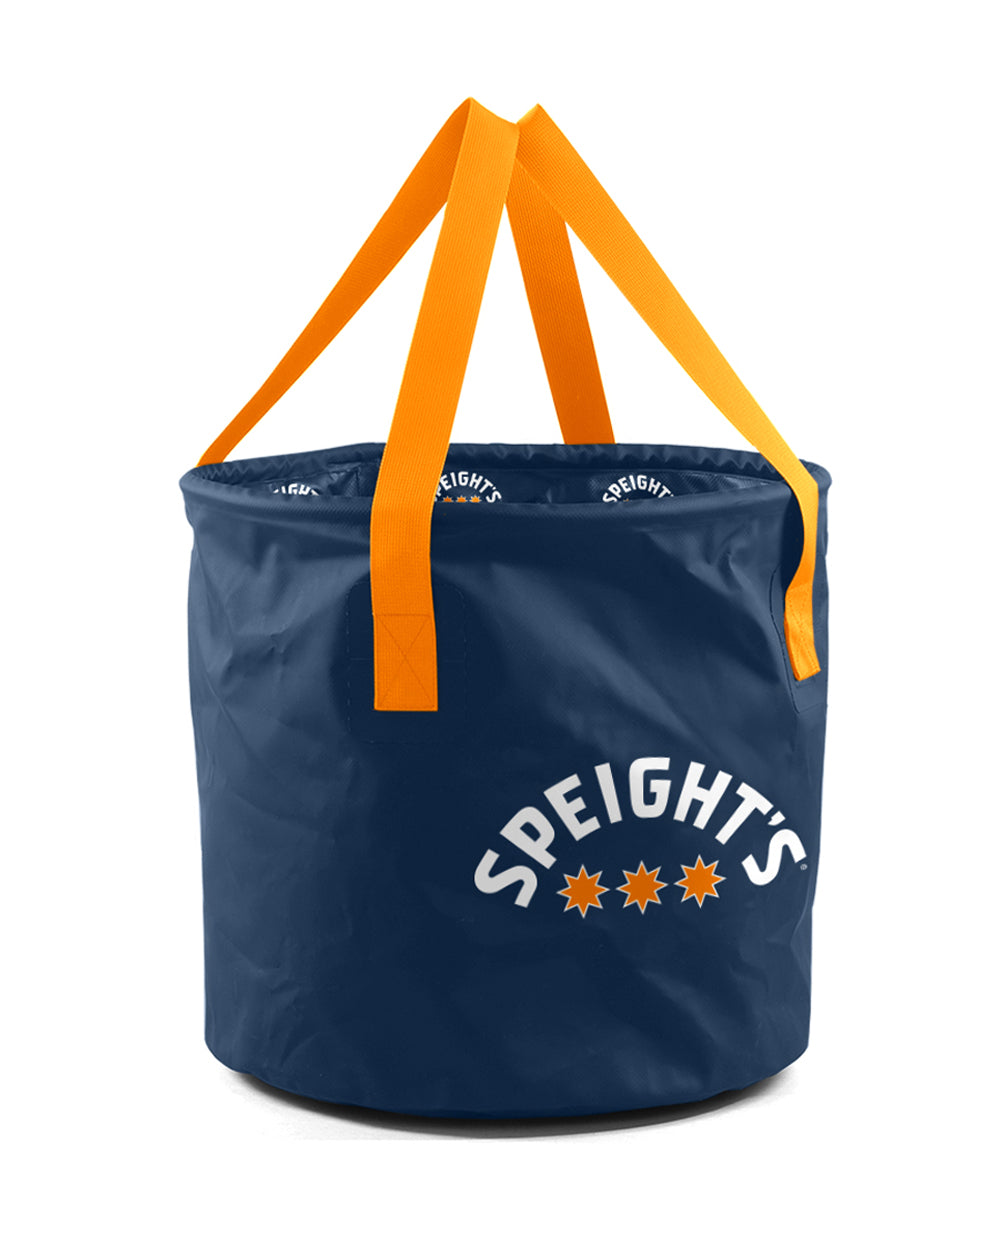 Speight's Summer Carry Bag -  Beer Gear Apparel & Merchandise - Speights - Lion Red - VB - Tokyo Dy merch